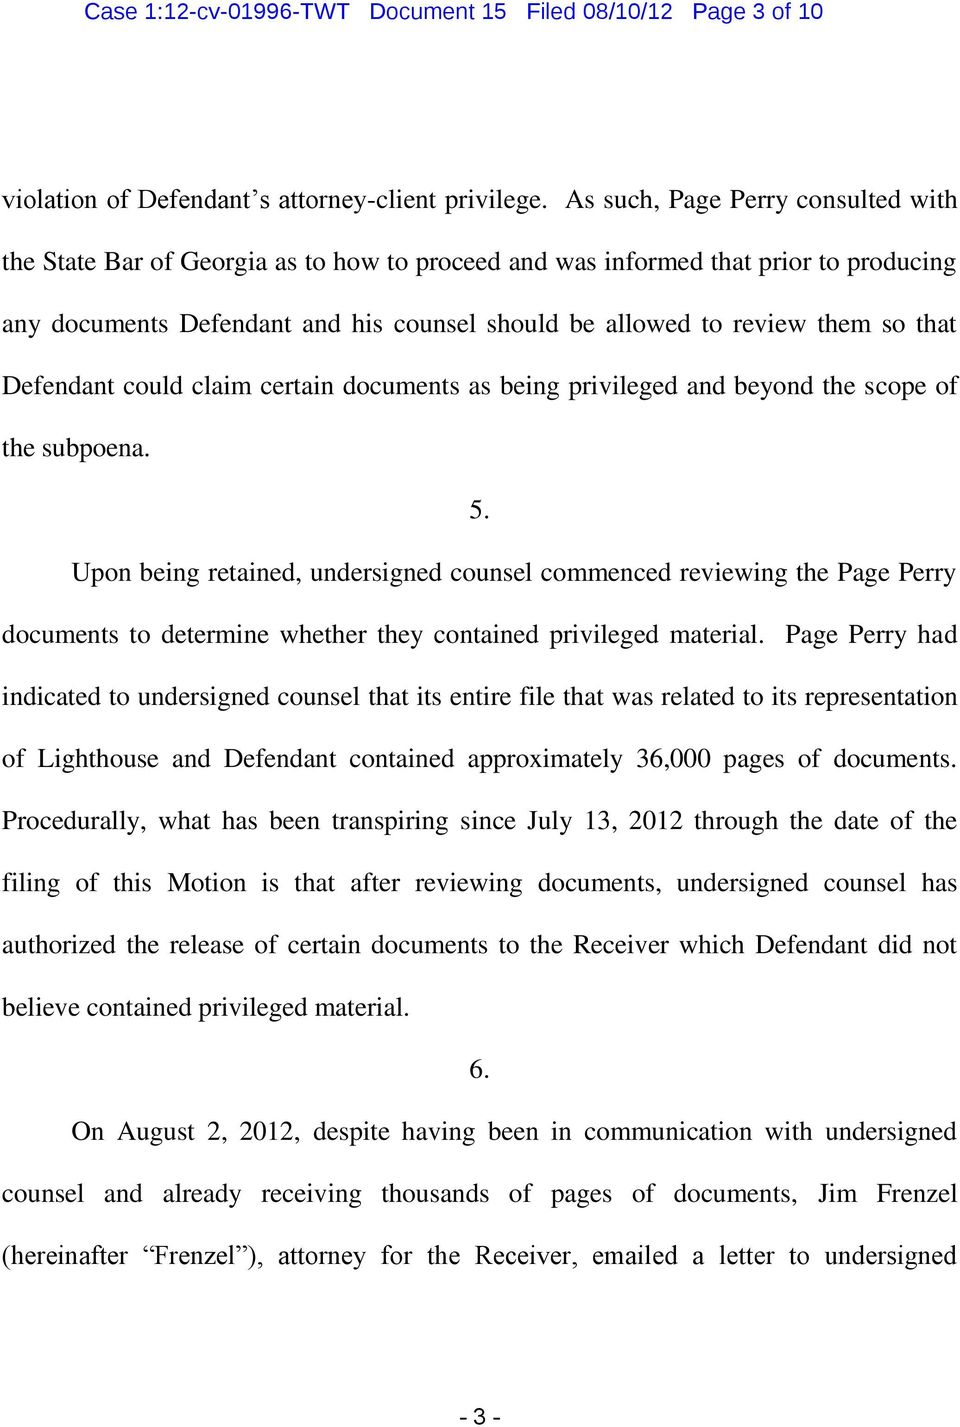 that Defendant could claim certain documents as being privileged and beyond the scope of the subpoena. 5.